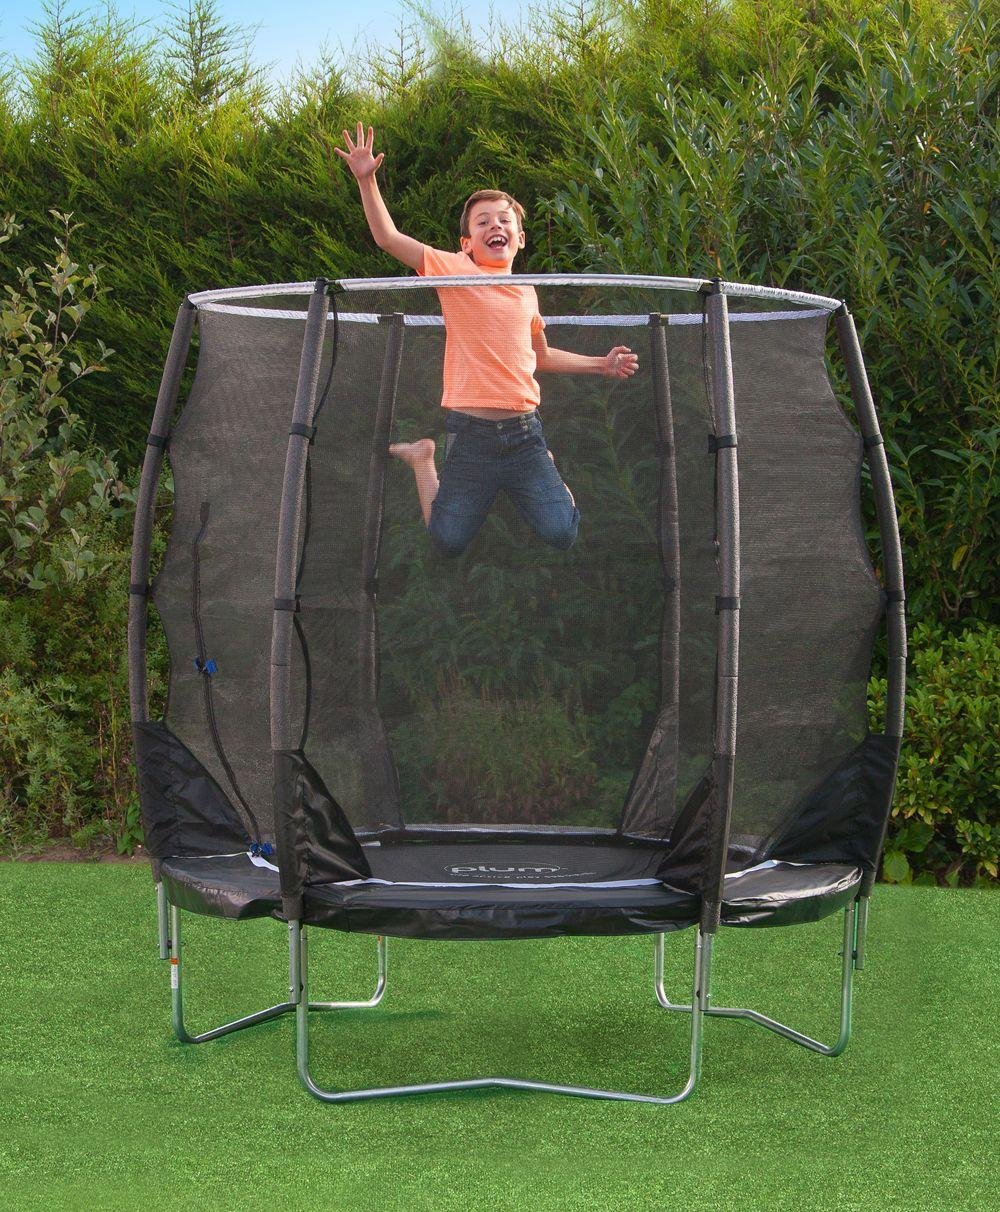 Plum Magnitude 6ft Outdoor Kids Trampoline with Enclosure Review